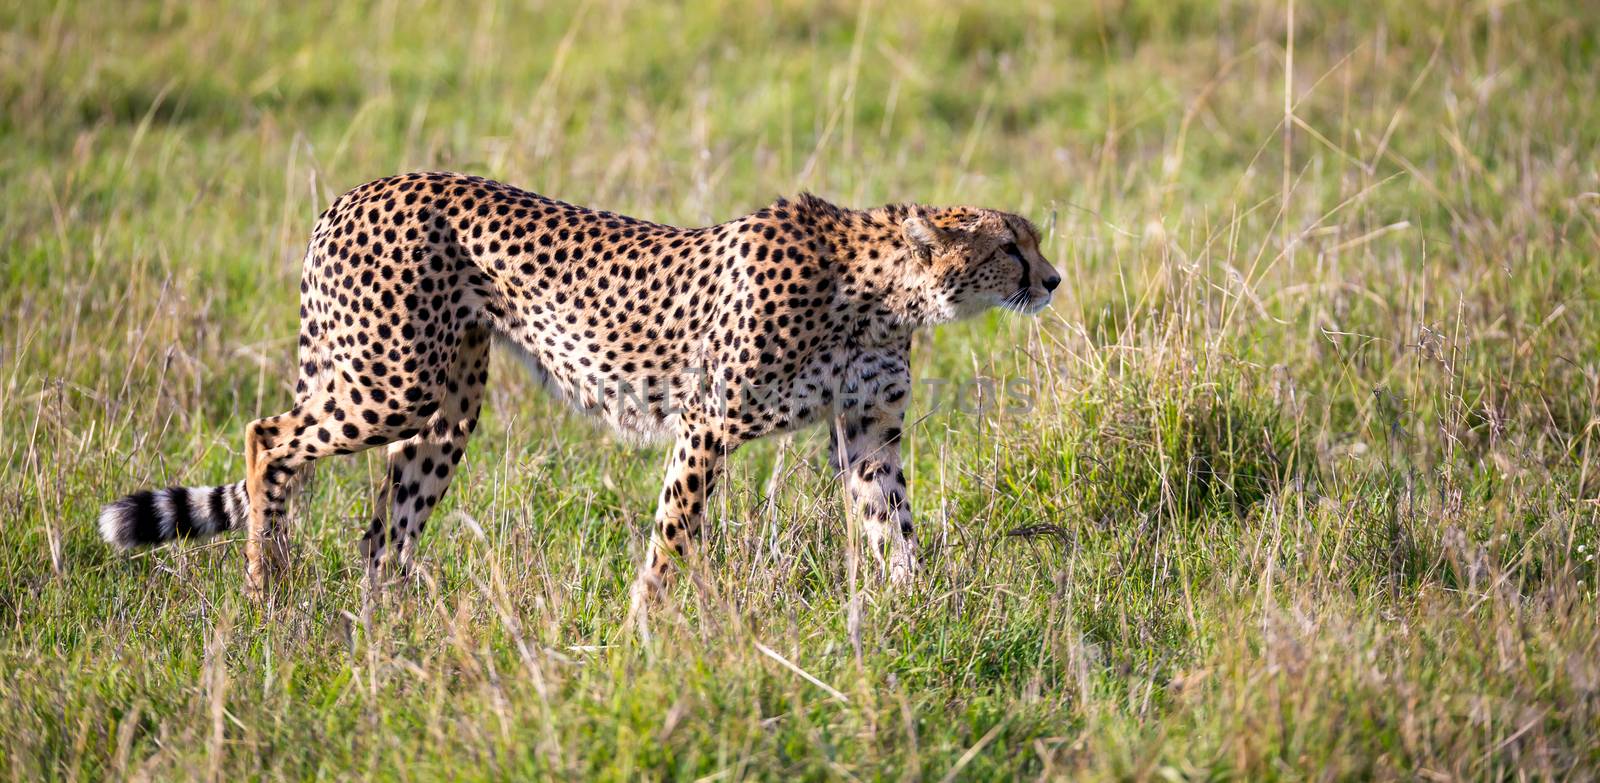 A cheetah walks between grass and bushes in the savannah of Keny by 25ehaag6